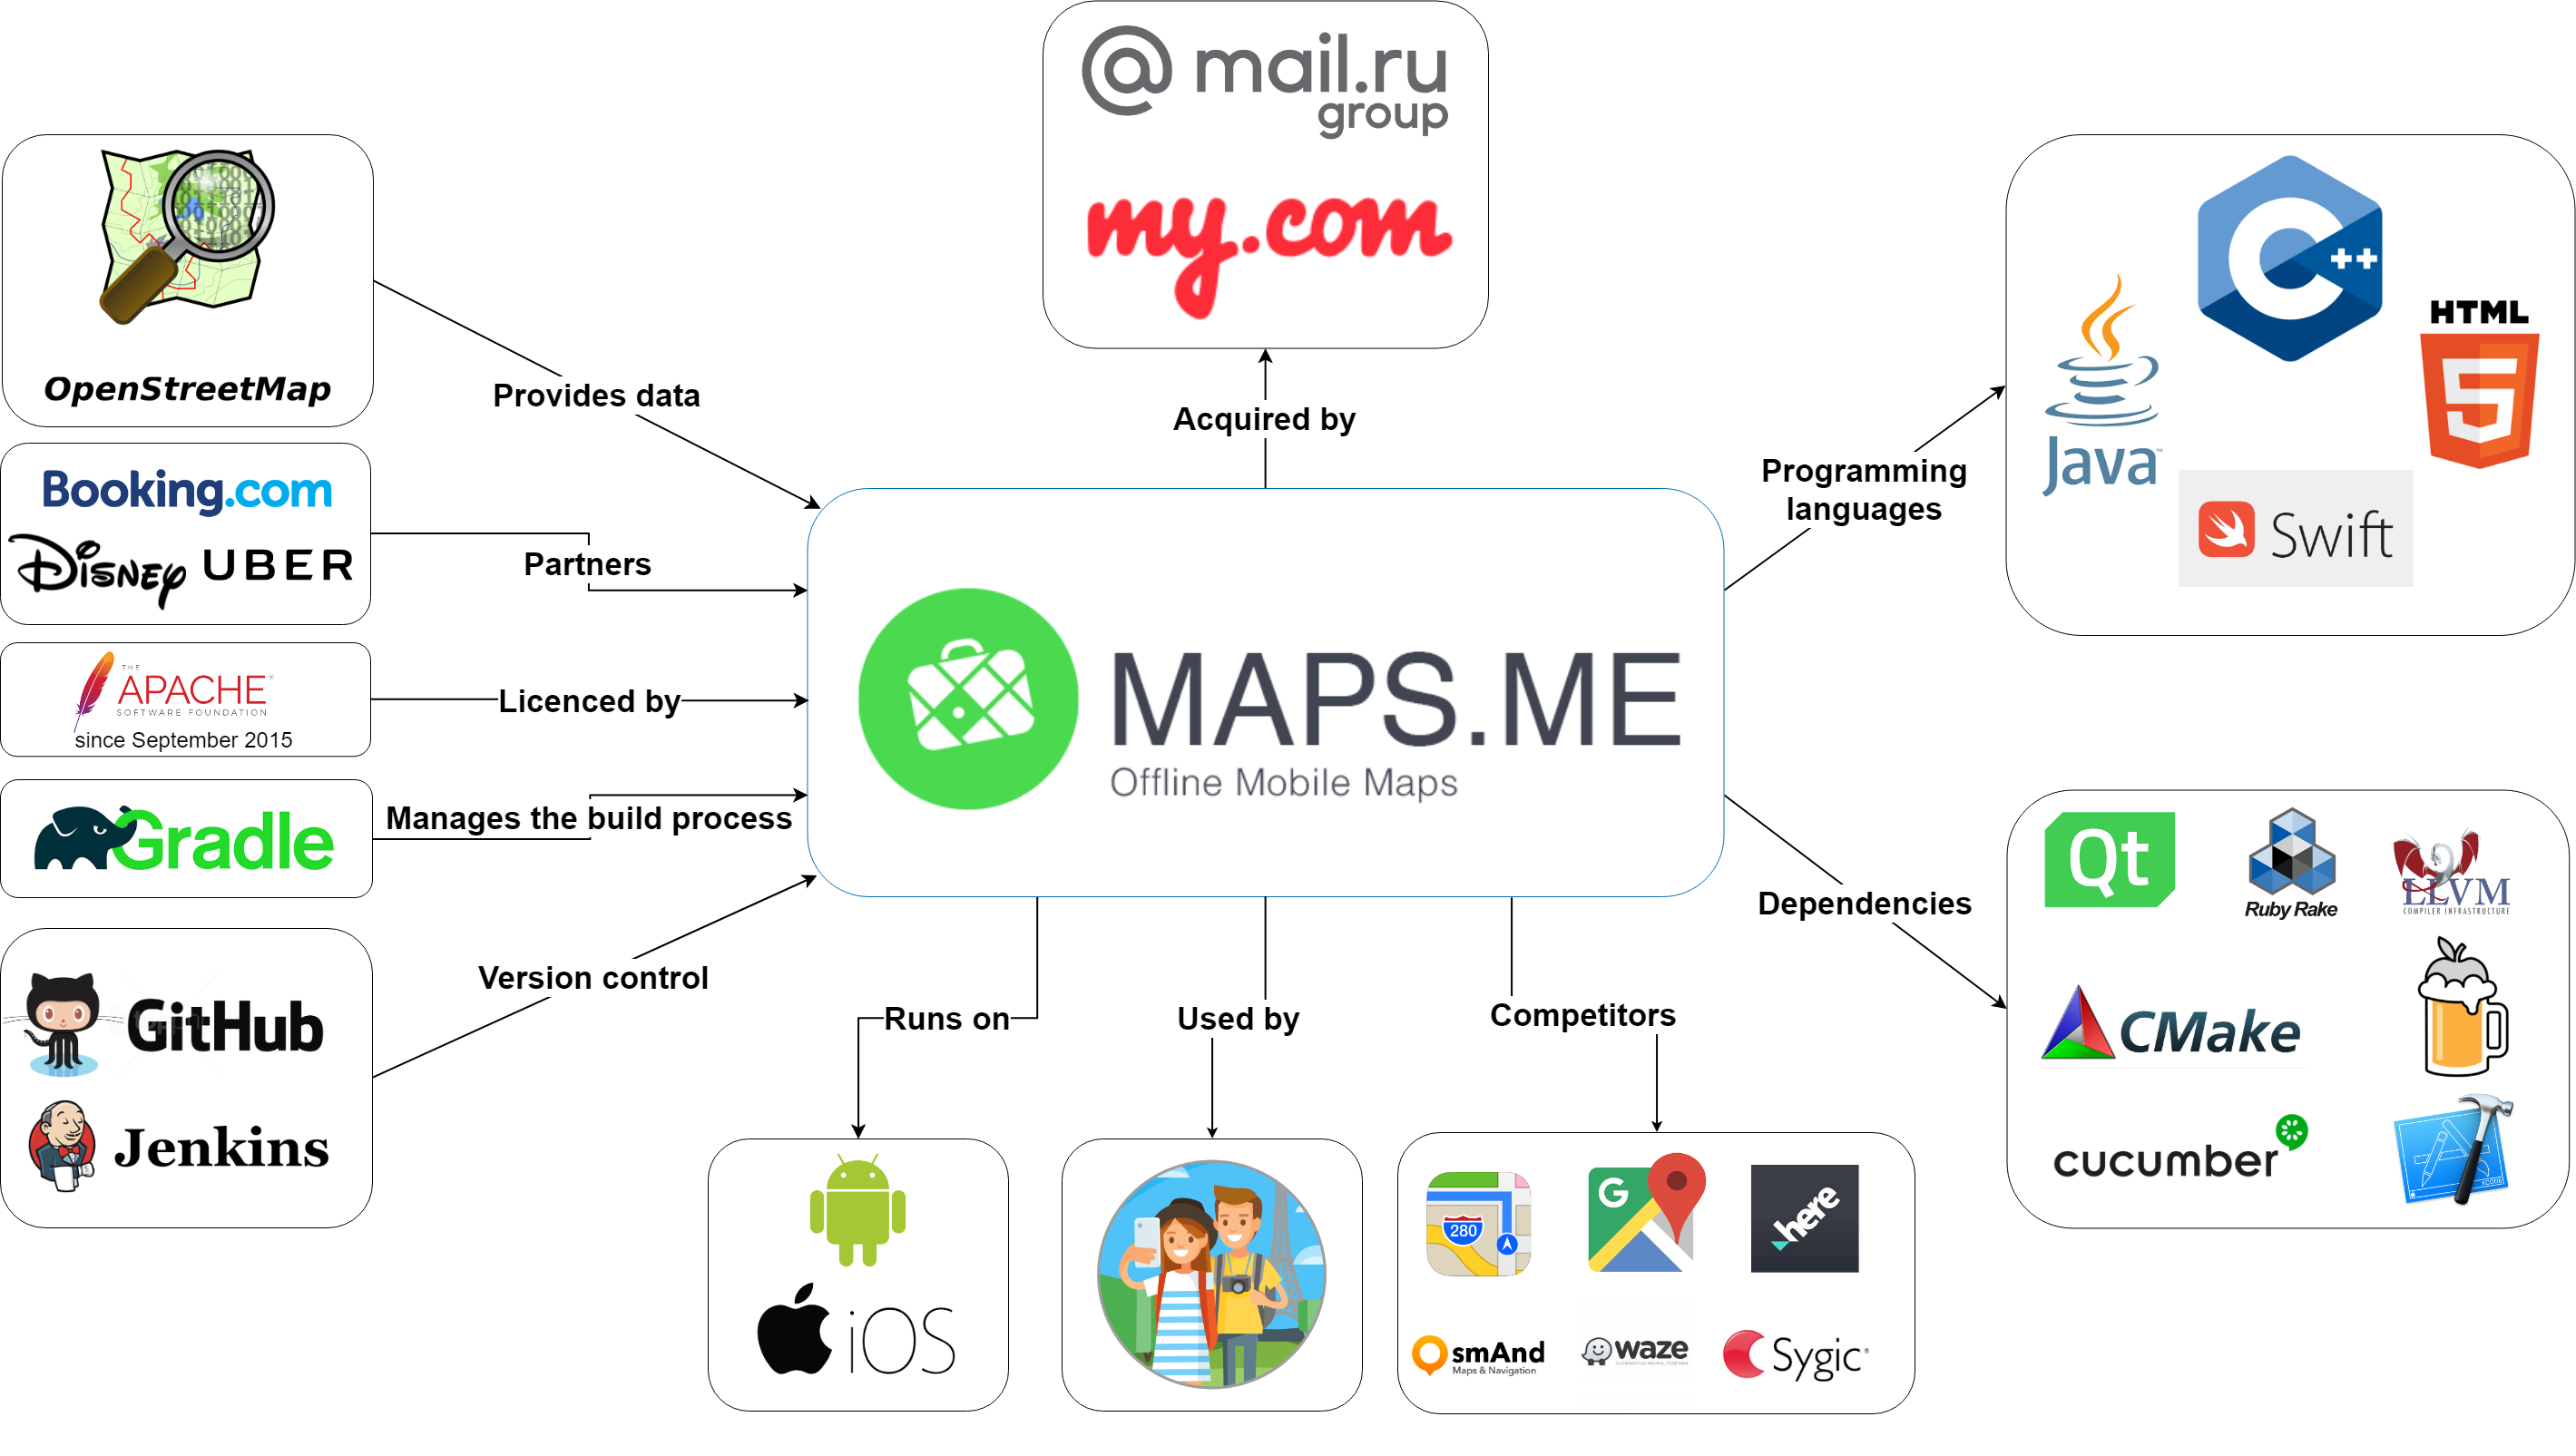 Figure 2: The context view of MAPS.ME